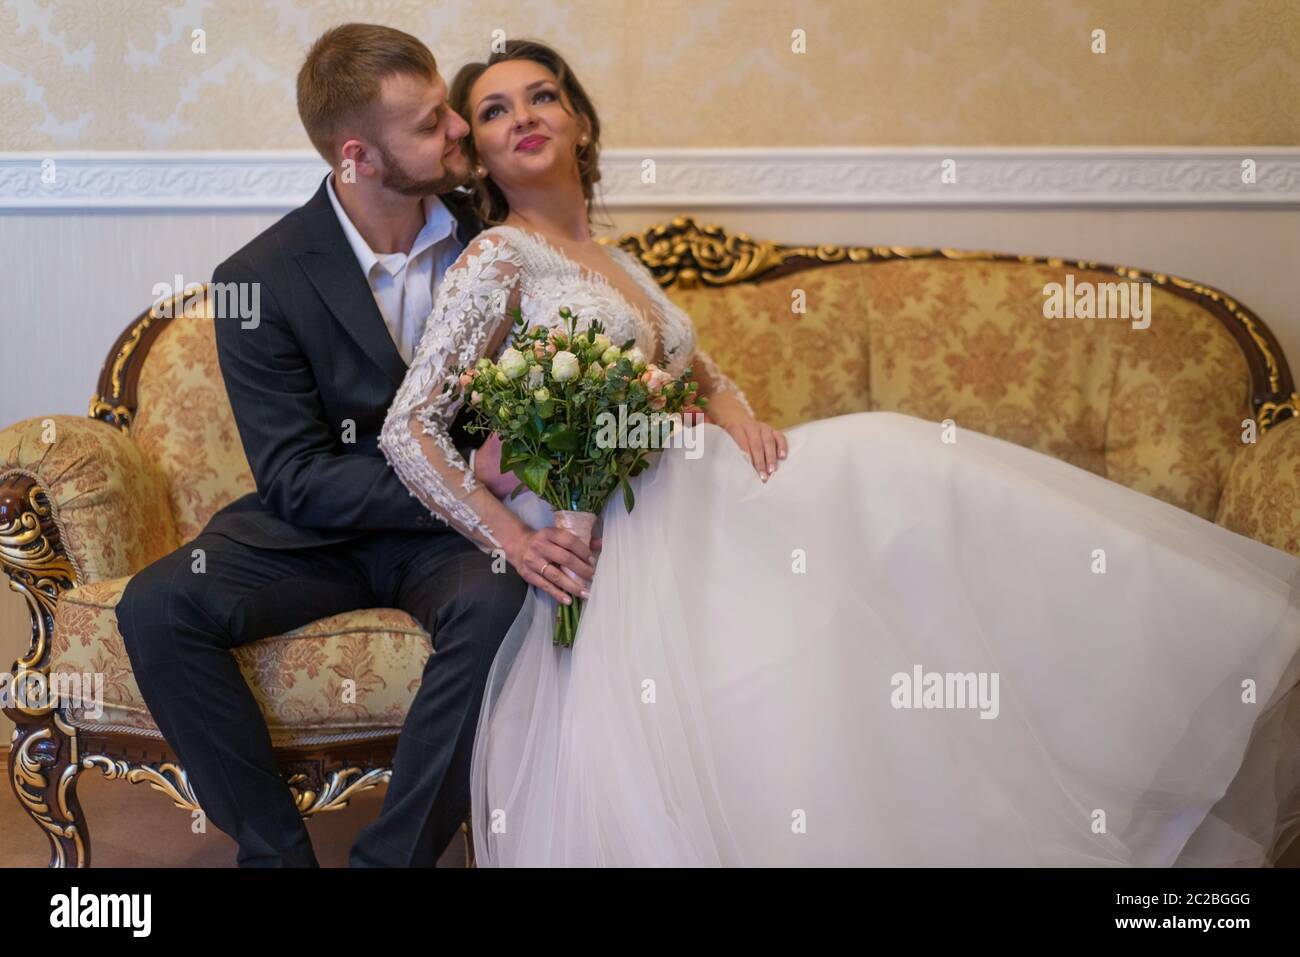 The bride and groom are sitting on a luxurious sofa, spreading a dress, the bride looks up, the bearded groom kisses her. Smiling young people of twen Stock Photo